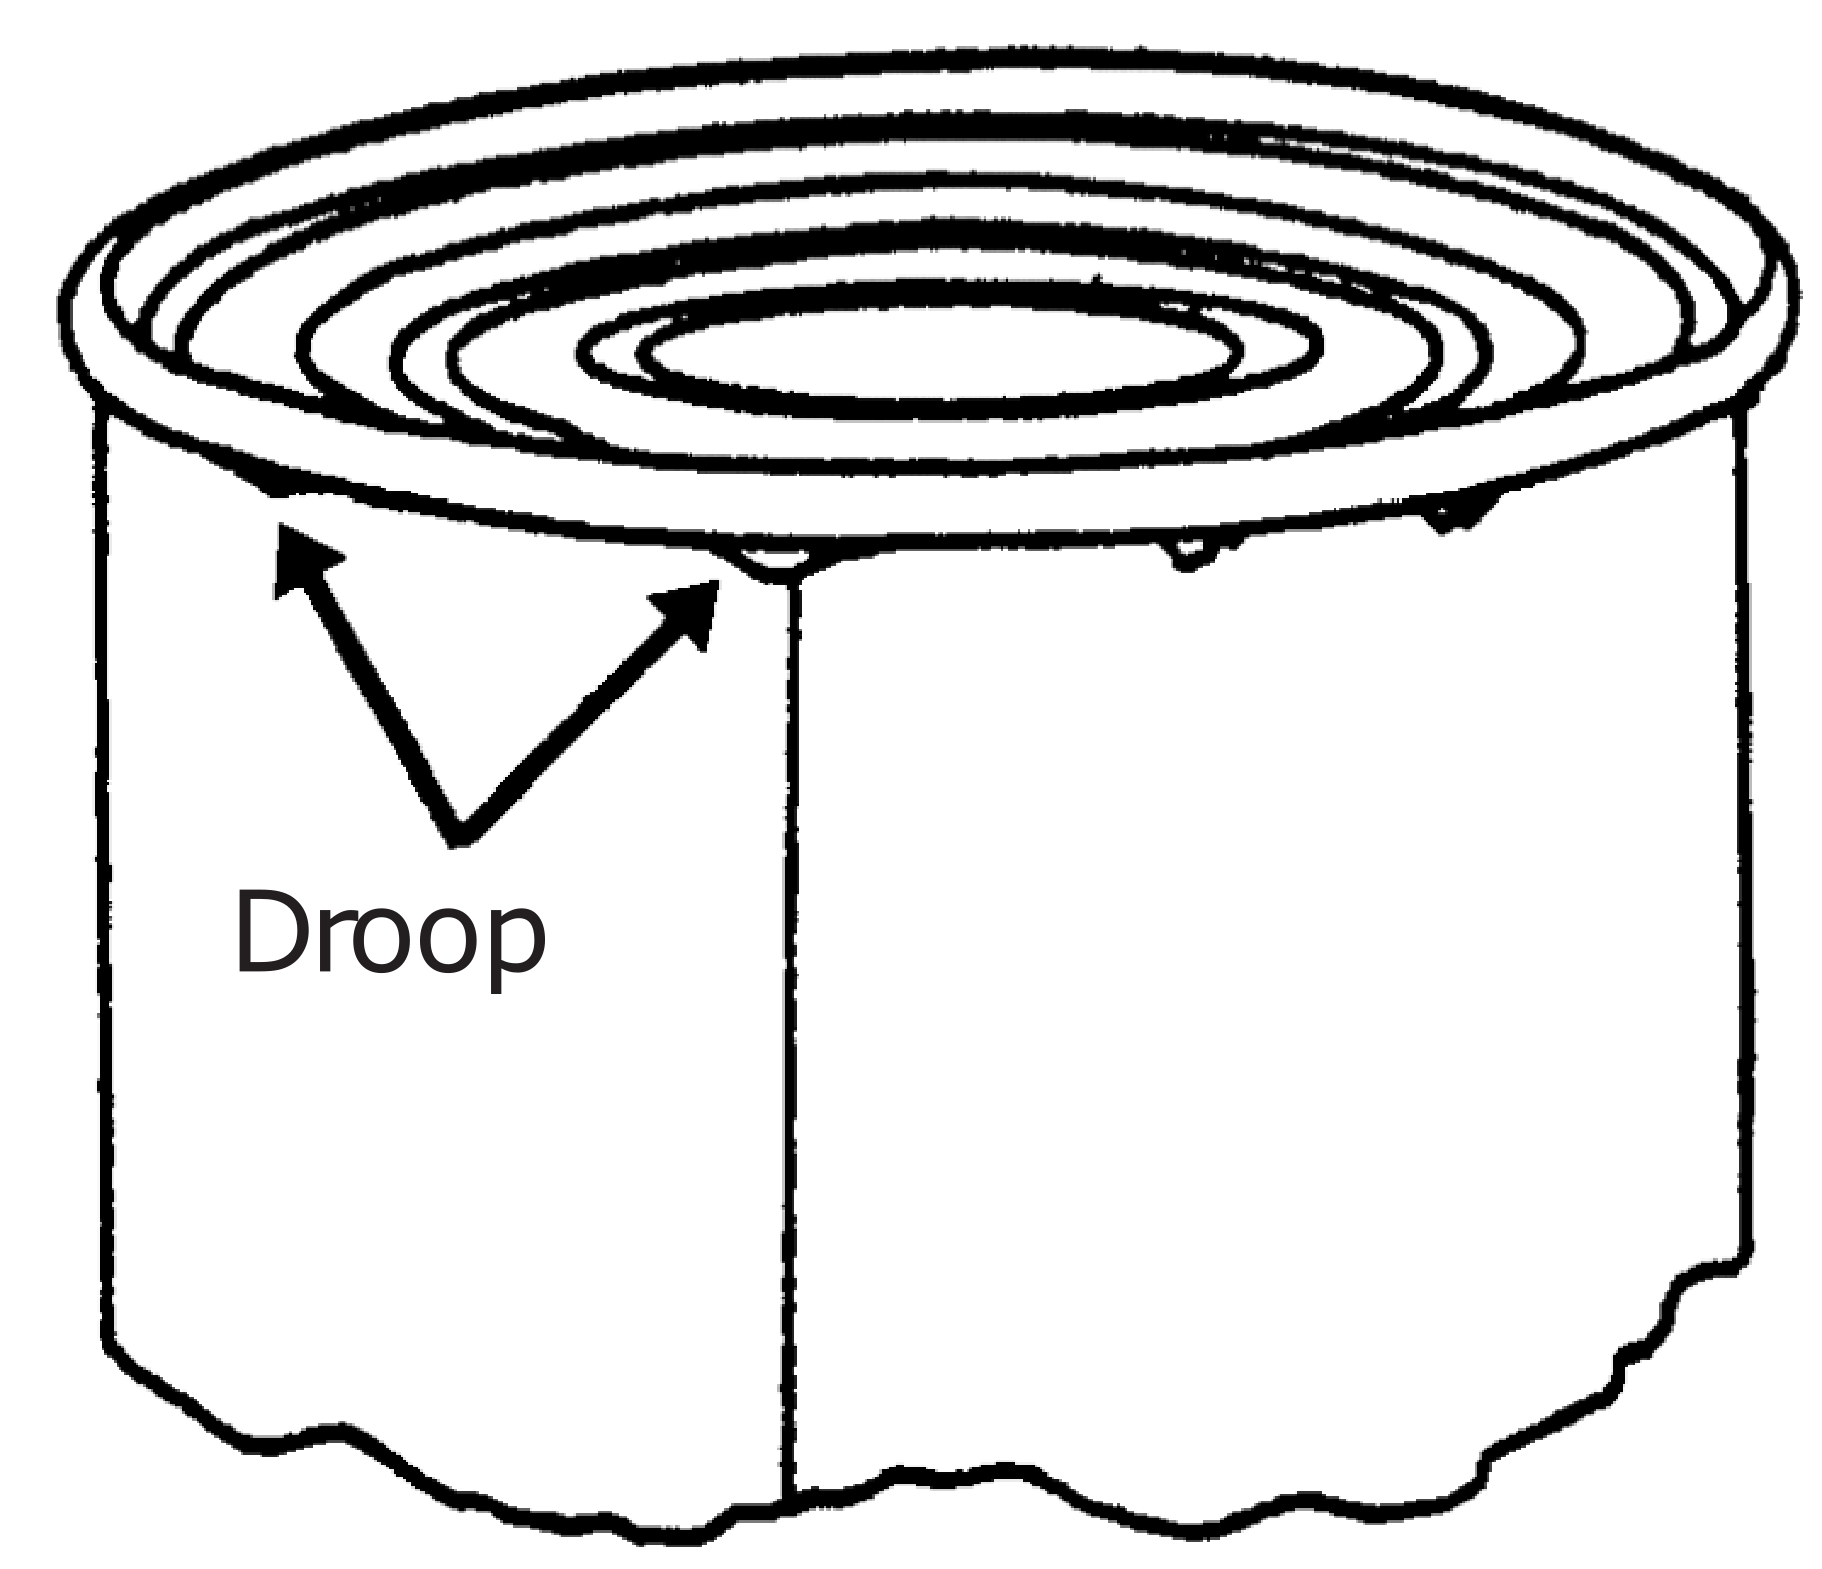 Cylinder with two arrows pointing at spots labeled droop